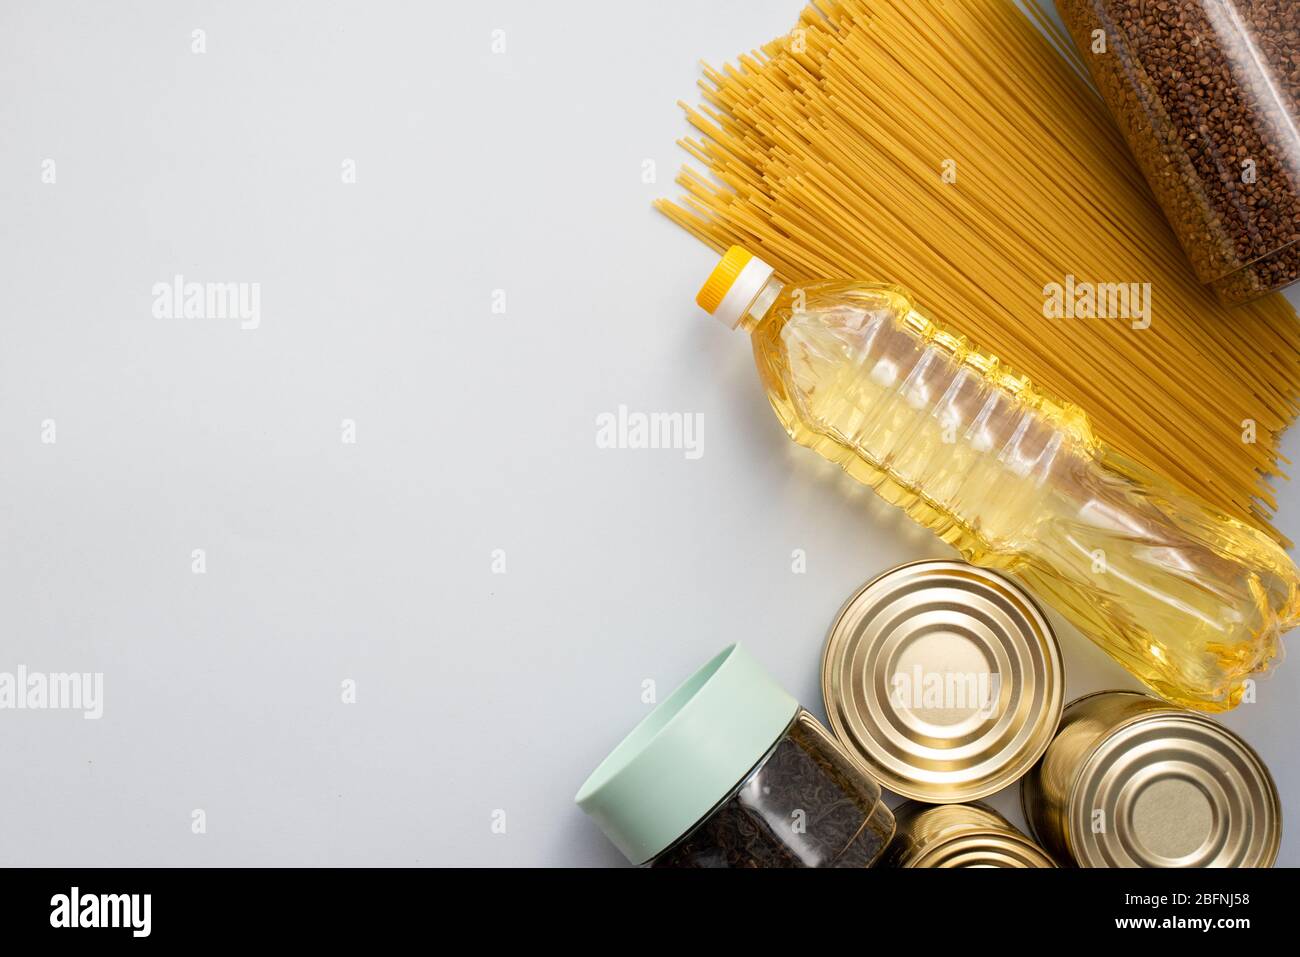 Cereals, various products, canned food, pasta and soap with place for text. Humanitarian assistance during the coronavirus pandemic. Stock of non-peri Stock Photo